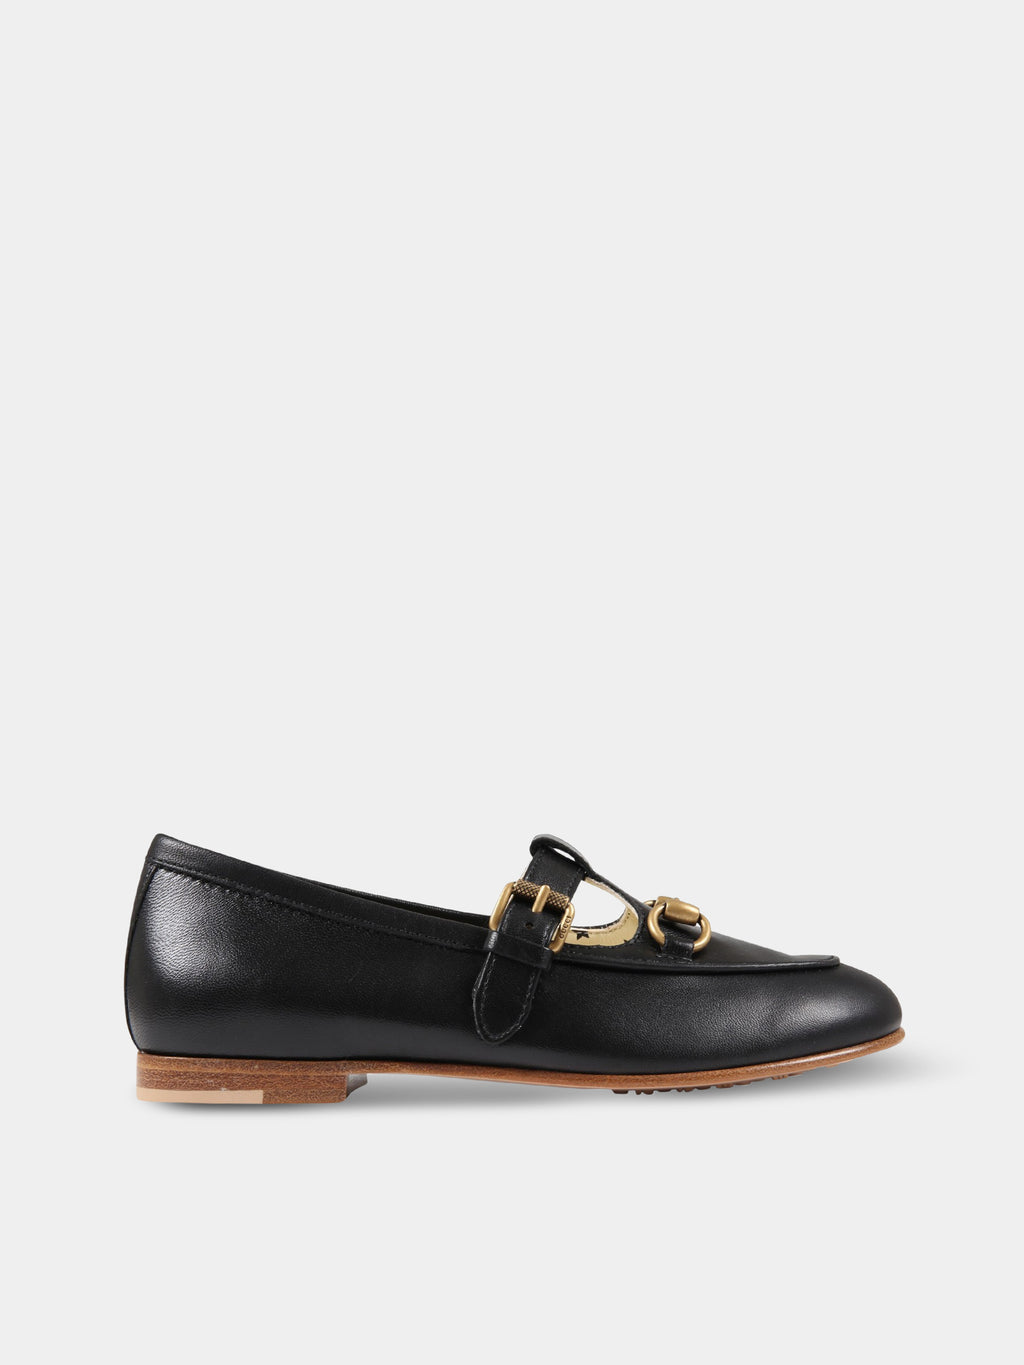 Black loafers for kids with horsebit